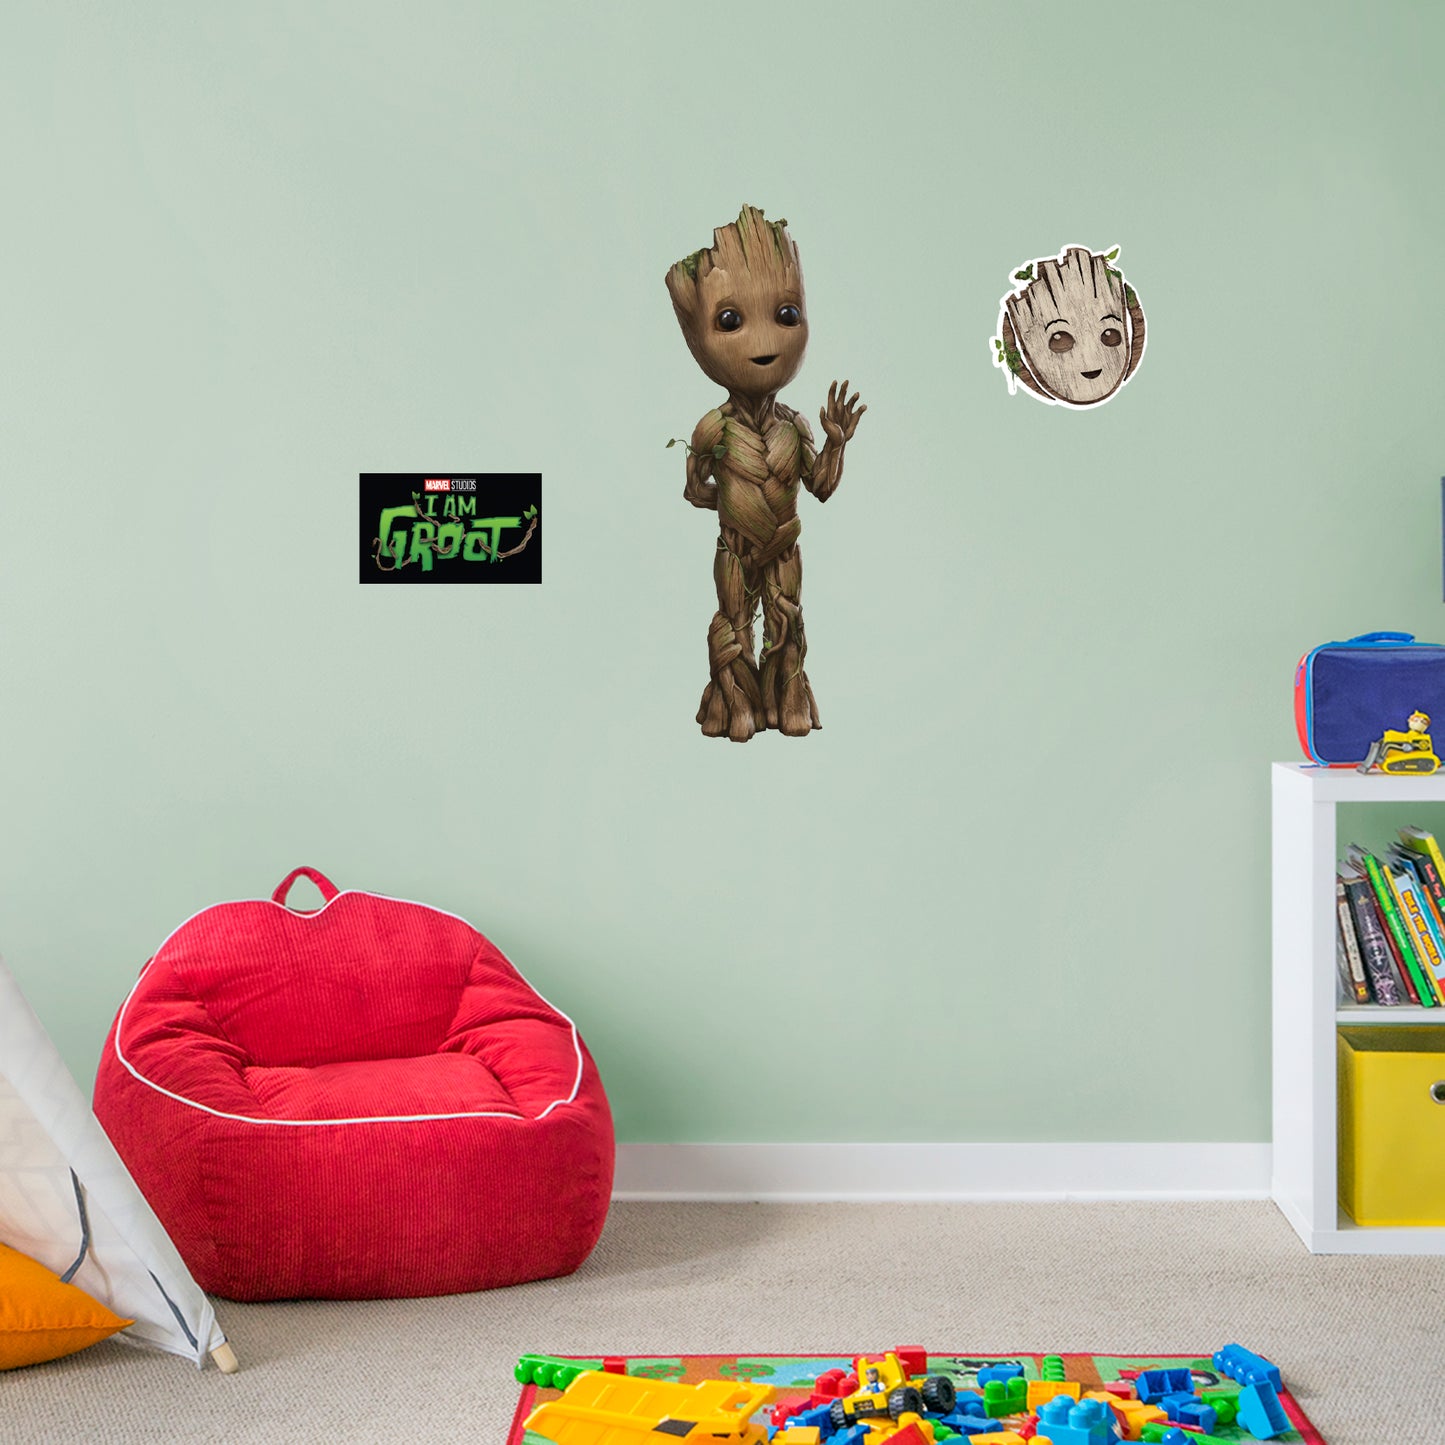 I am Groot: Groot RealBig        - Officially Licensed Marvel Removable     Adhesive Decal